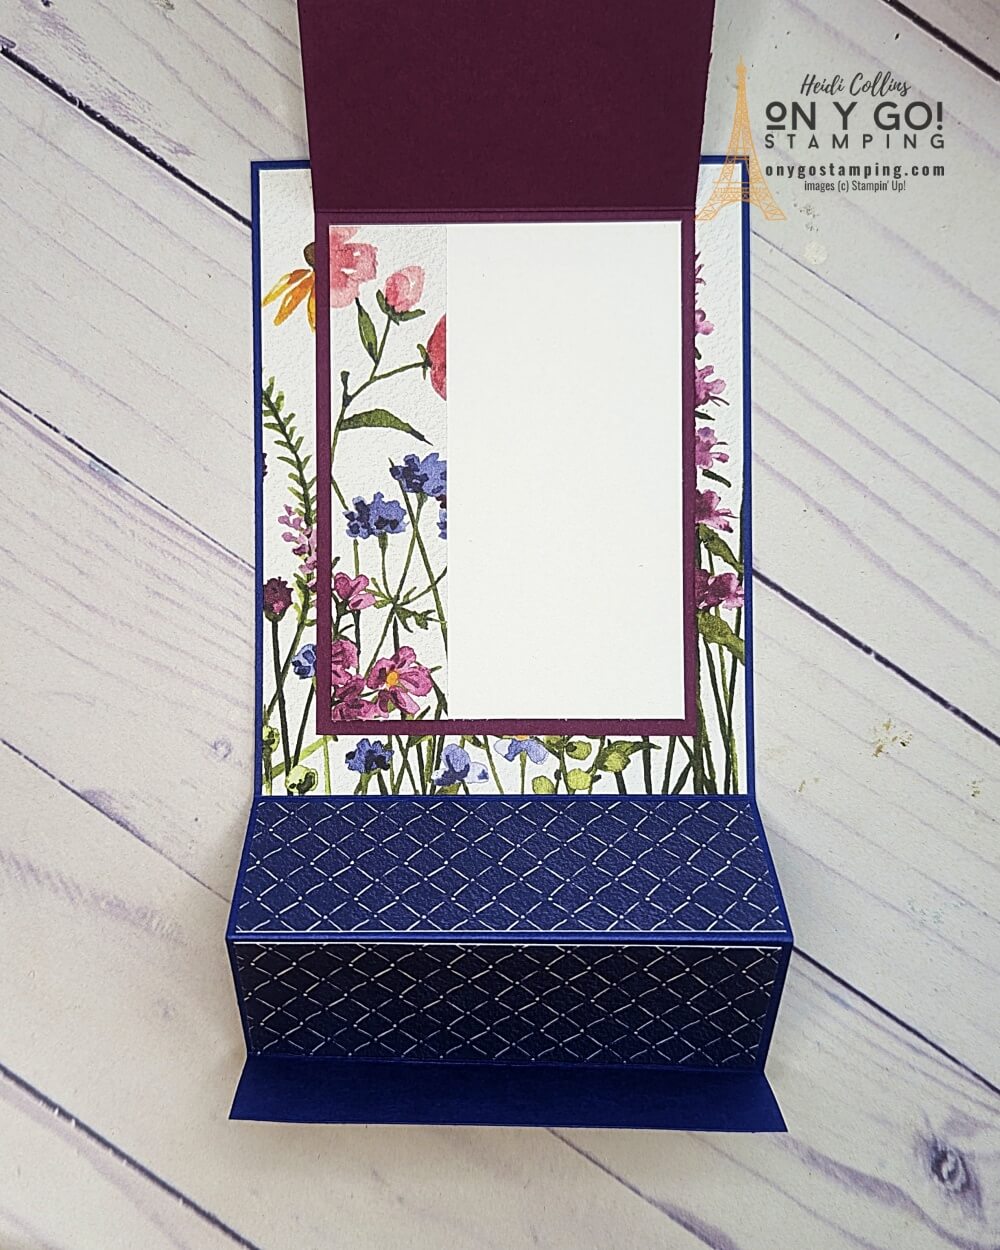 Are you looking for a fun and unique way to surprise someone special? Look no further! This handmade card featuring the Dainty Flowers patterned paper will make a beautiful and memorable handmade card sure to bring a smile to the recipient's face. This handmade card is sure to stand out and bring joy to the special person in your life!